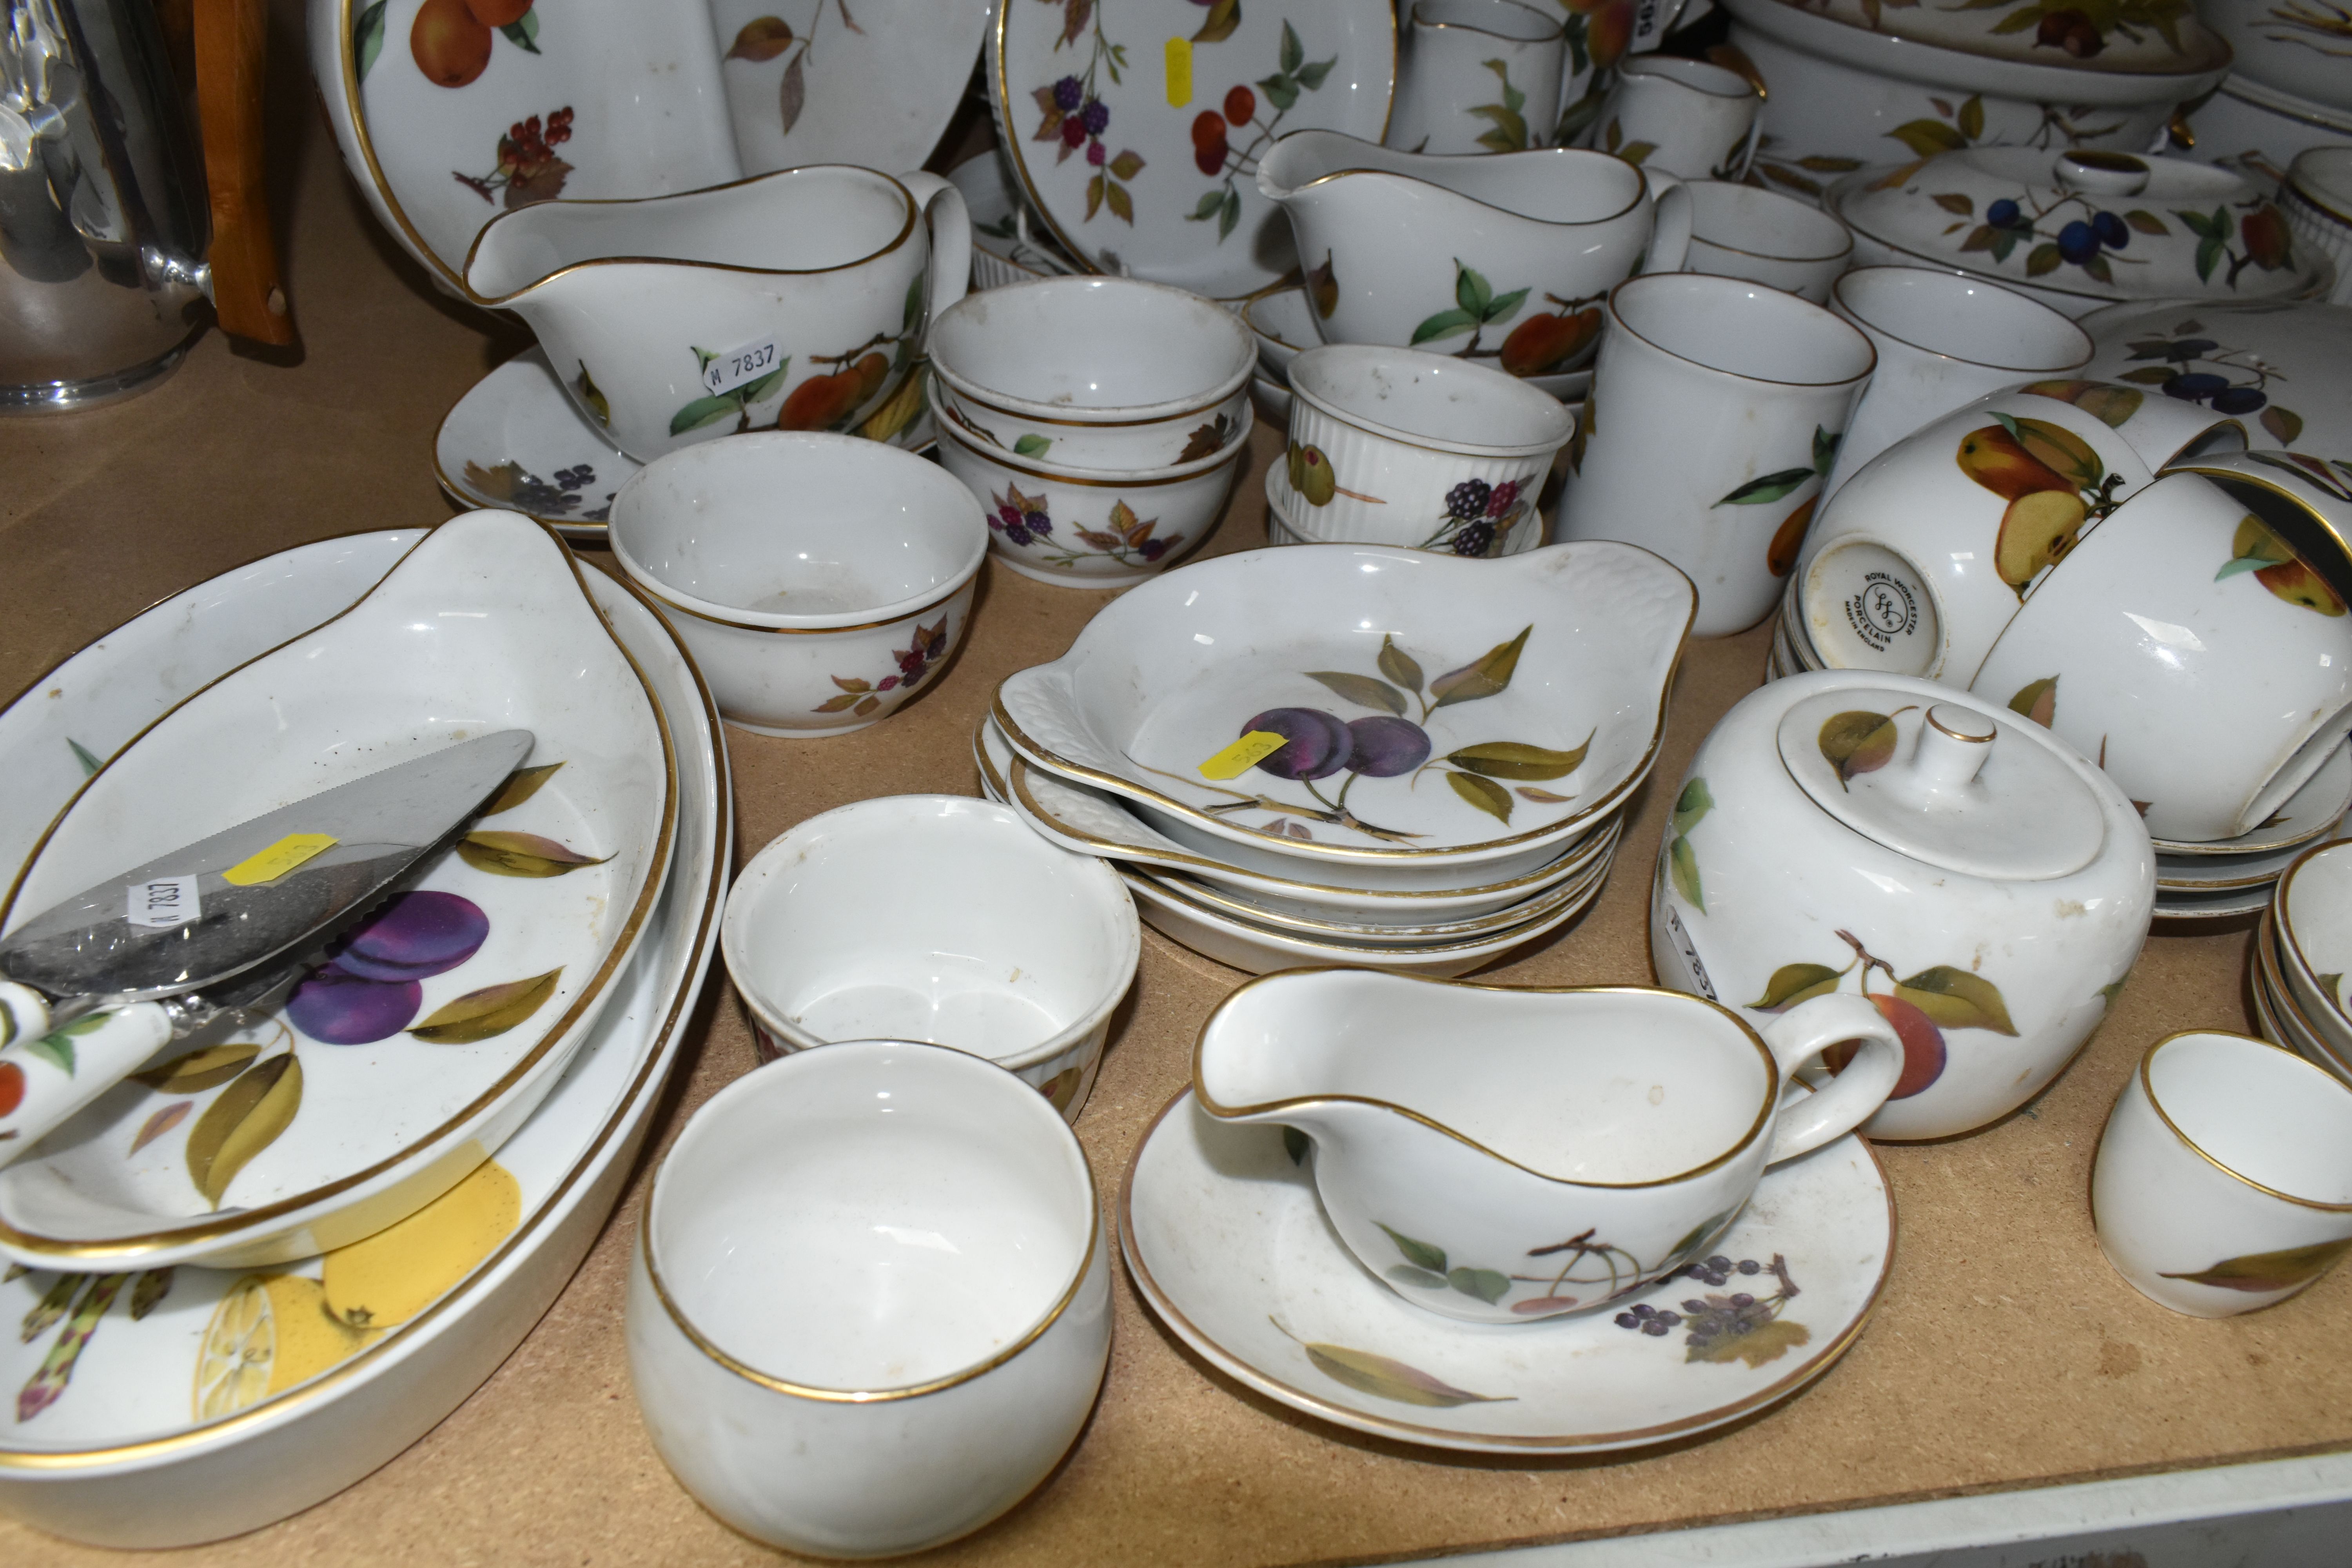 A LARGE QUANTITY OF ROYAL WORCESTER EVESHAM DINING WARE, including serving dishes, plates, - Image 4 of 7